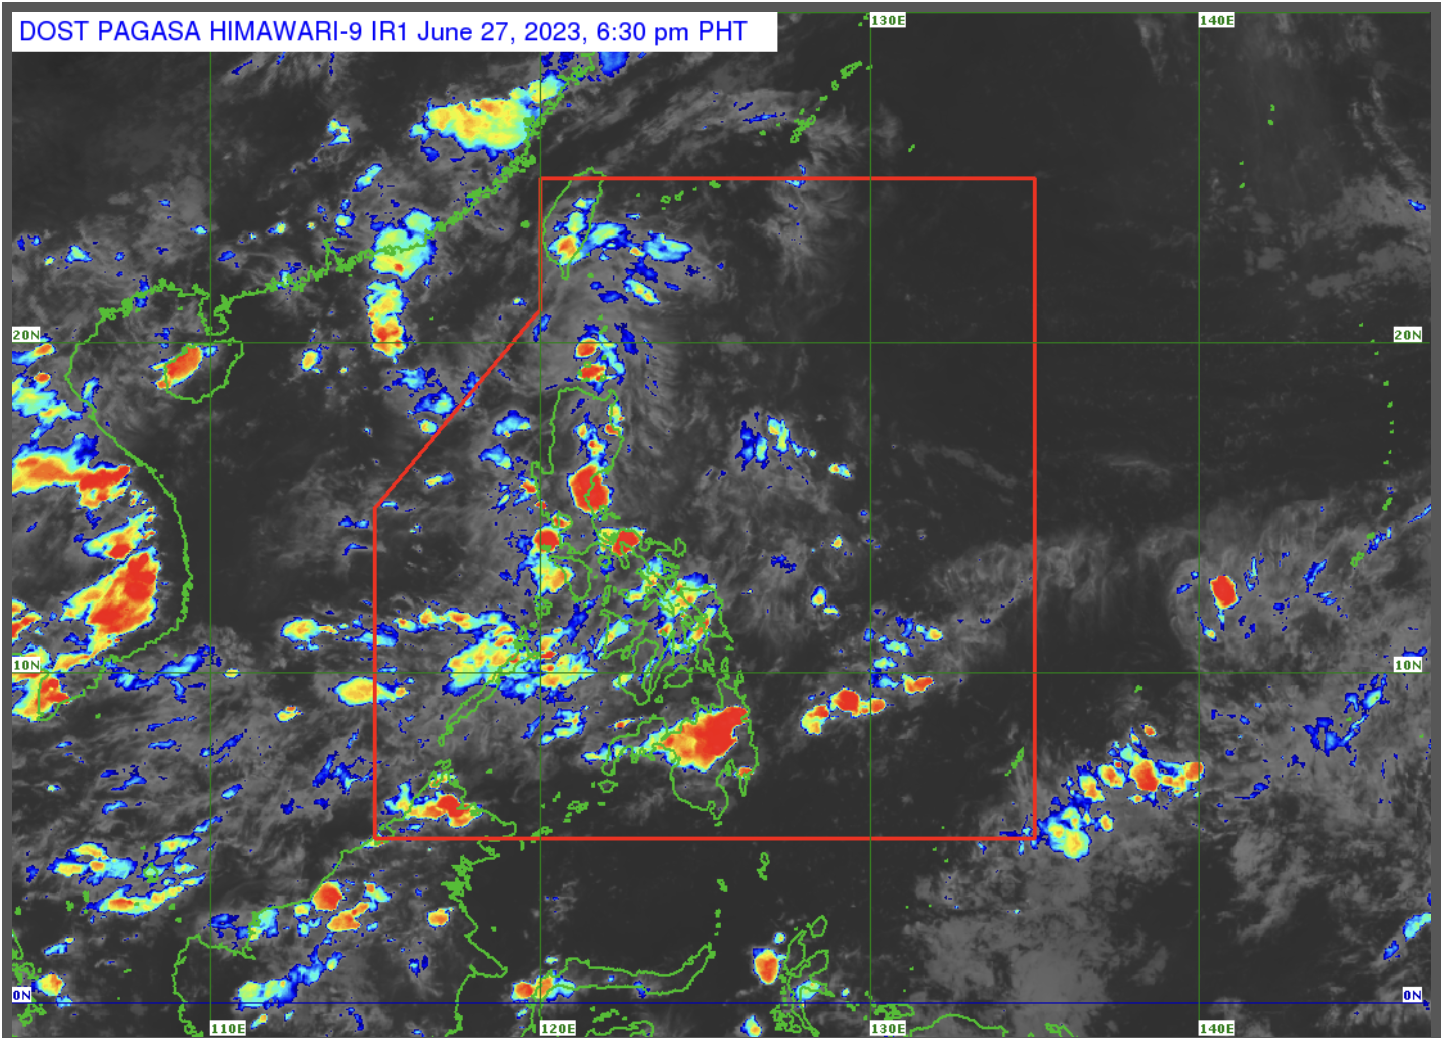 Wet, cloudy Wednesday in parts of Luzon, Visayas; fair weather in rest of PH